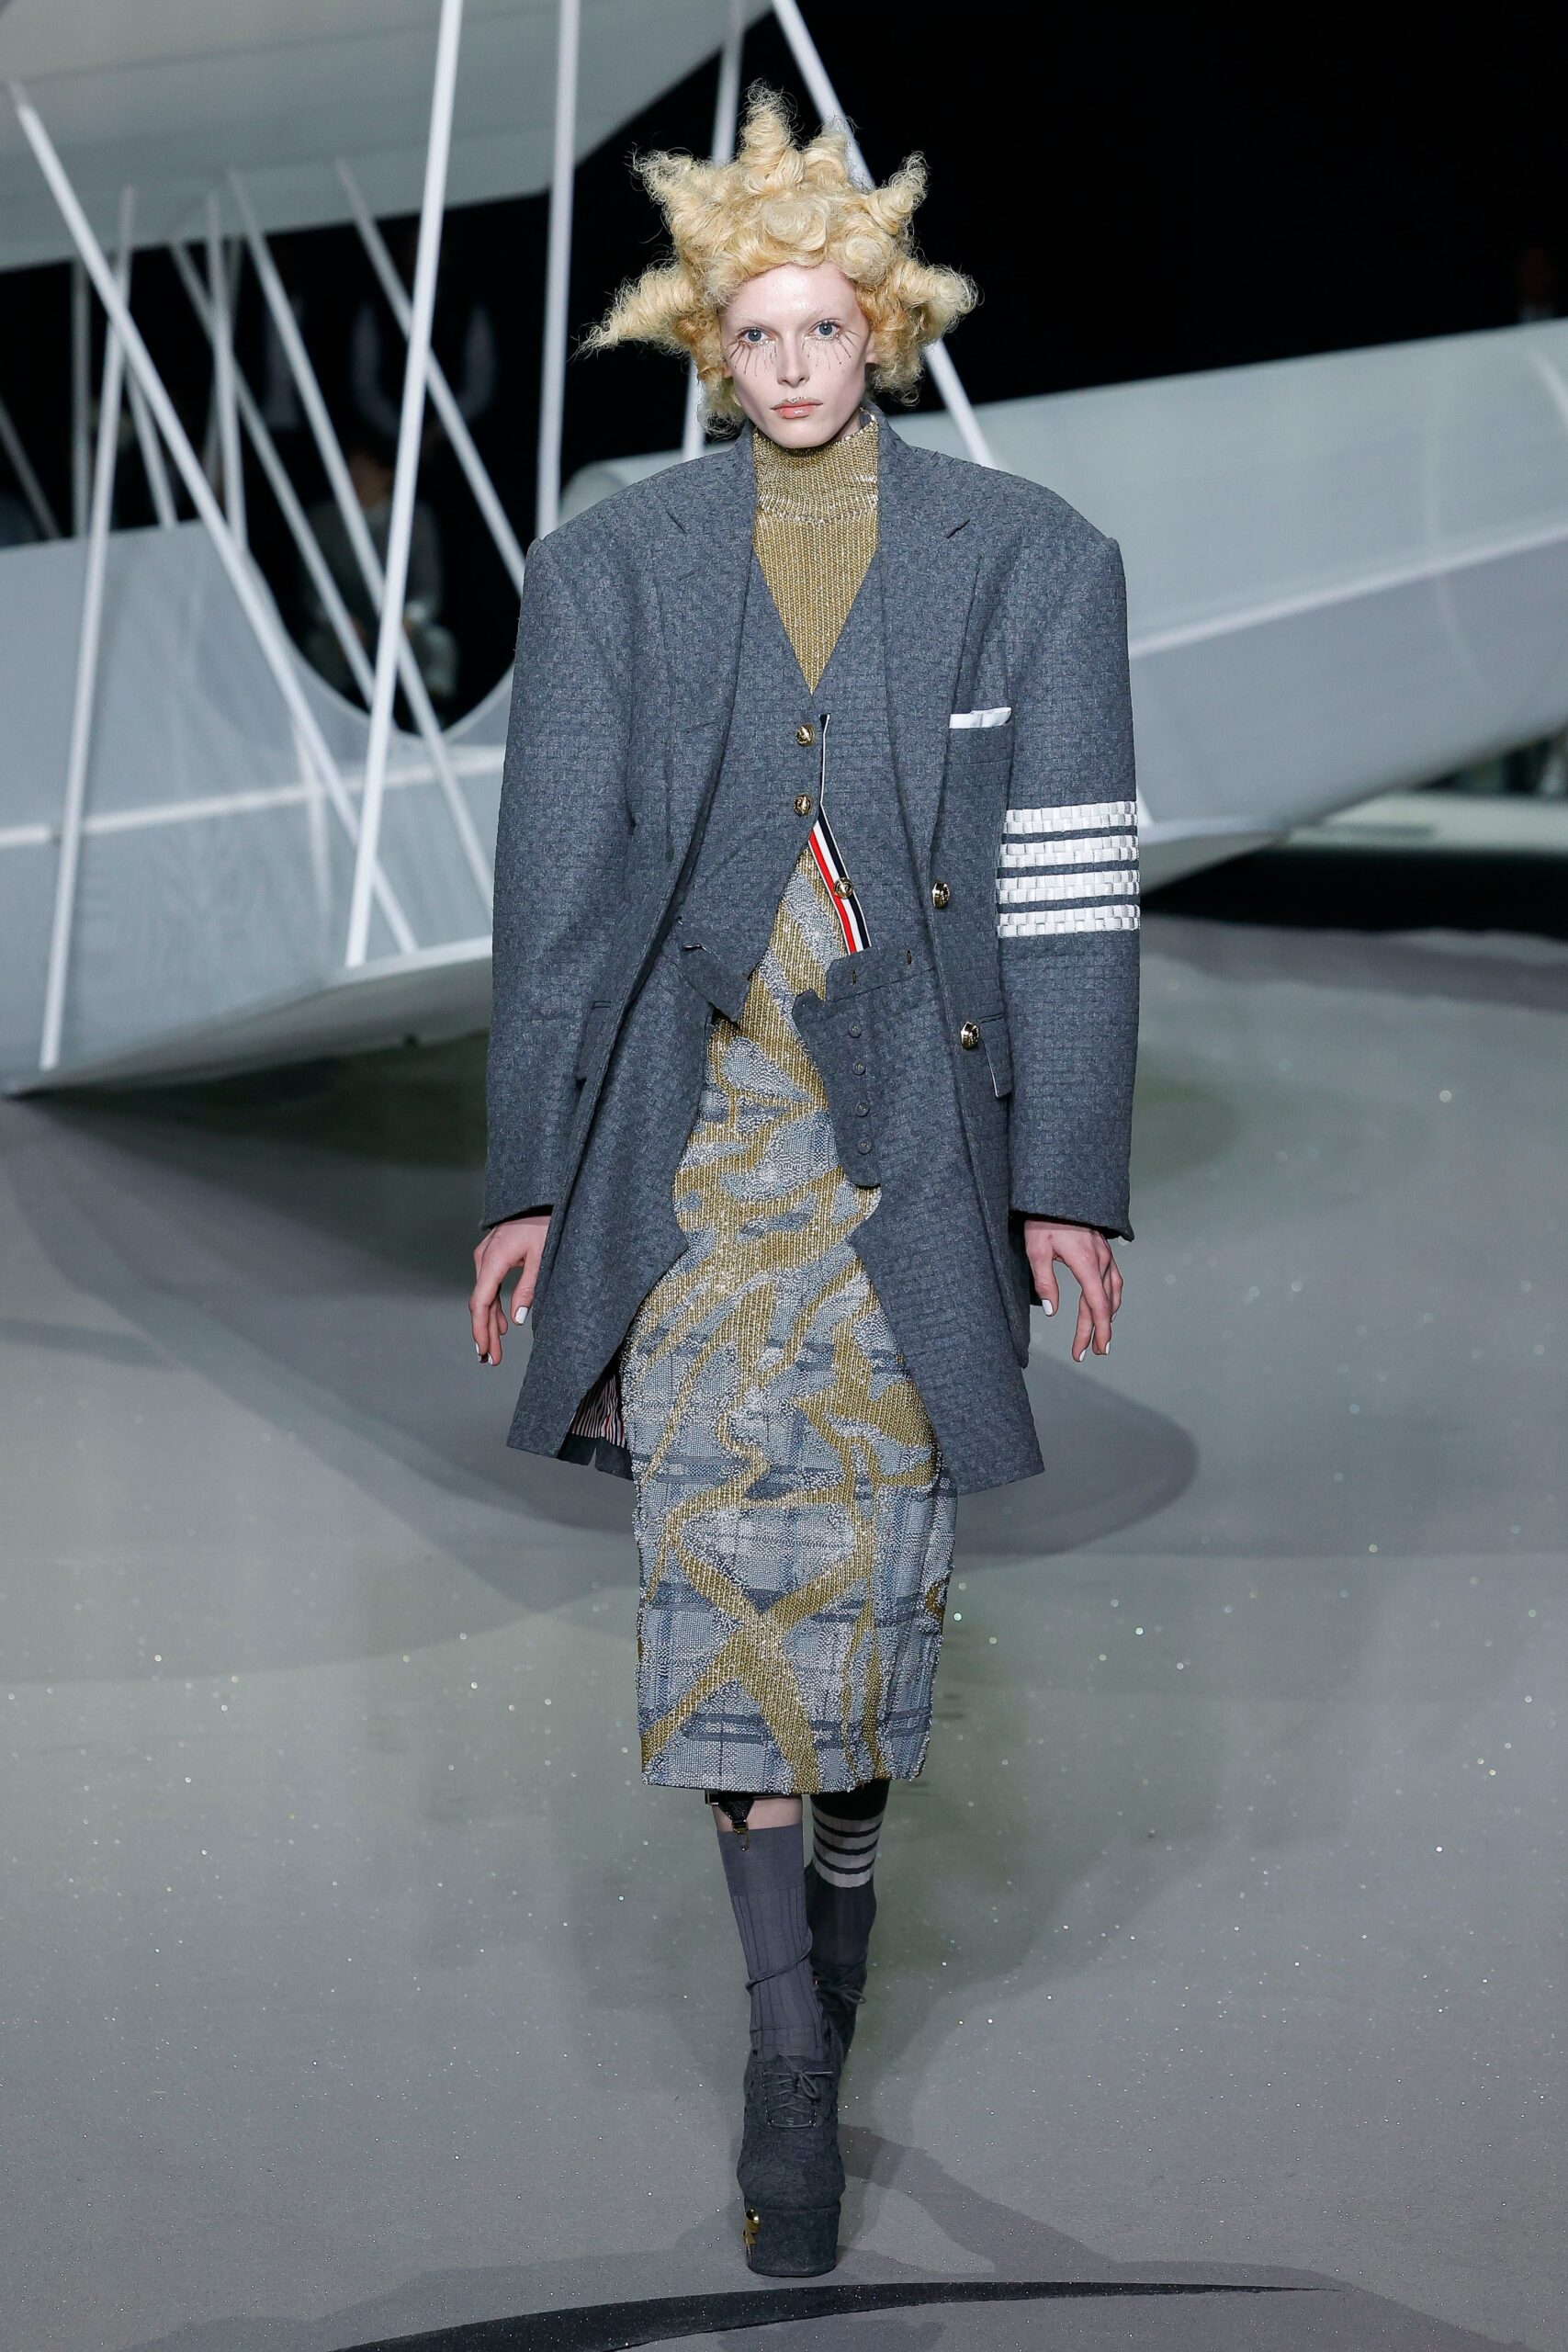 New York Fashion Week Schedule Includes Thom Browne and Ludovic de ...